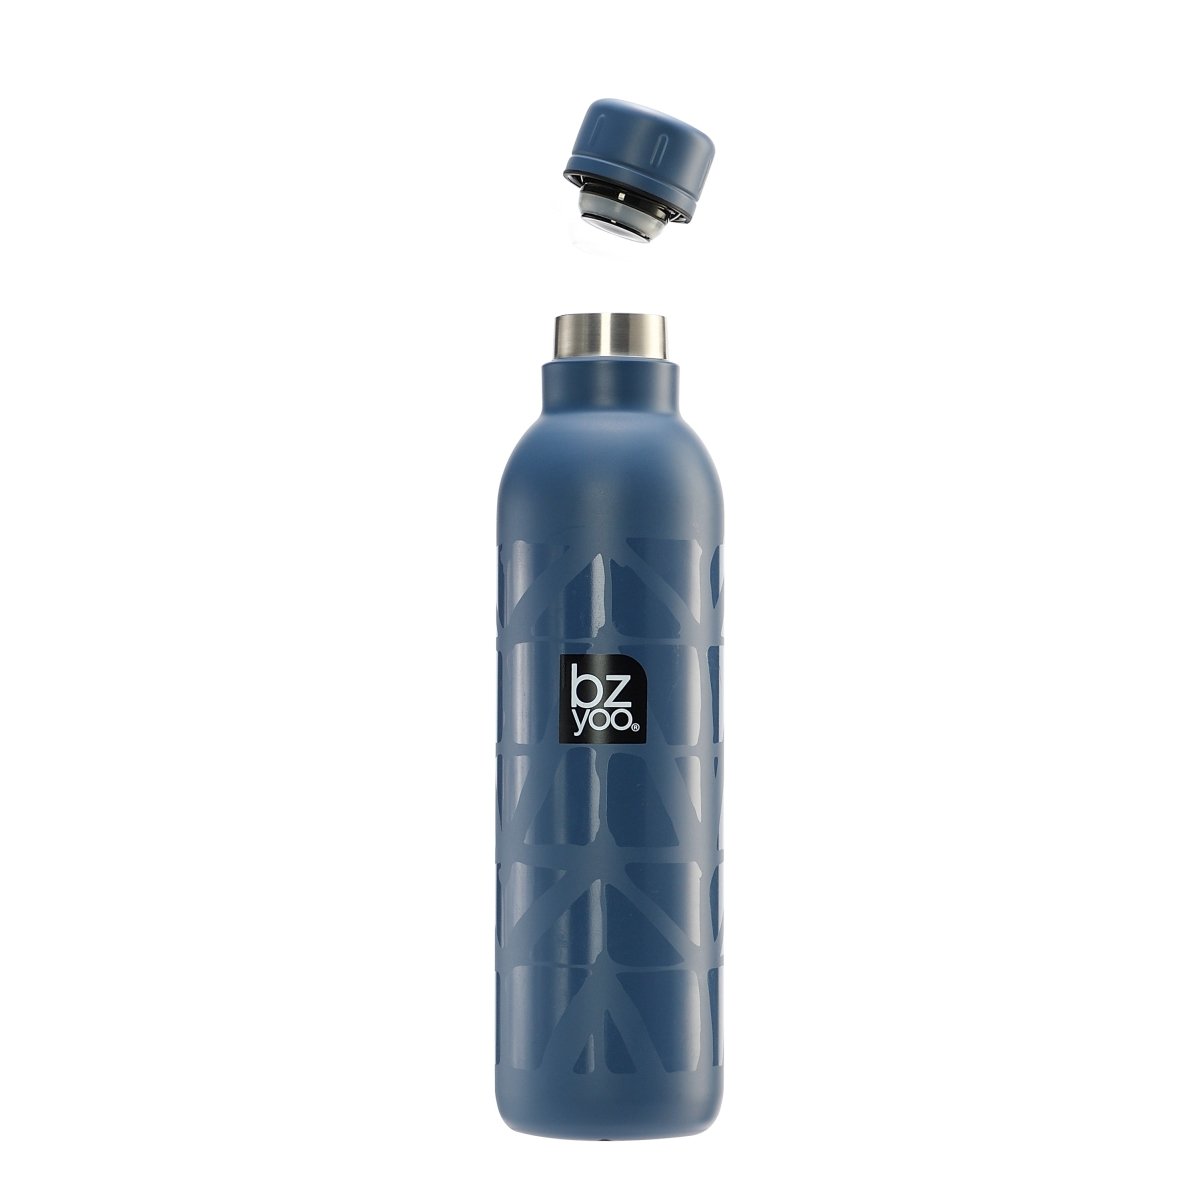 17oz H2Go Insulated Stainless Steel Double Wall Water Bottle - Leona Blue - bzyoo